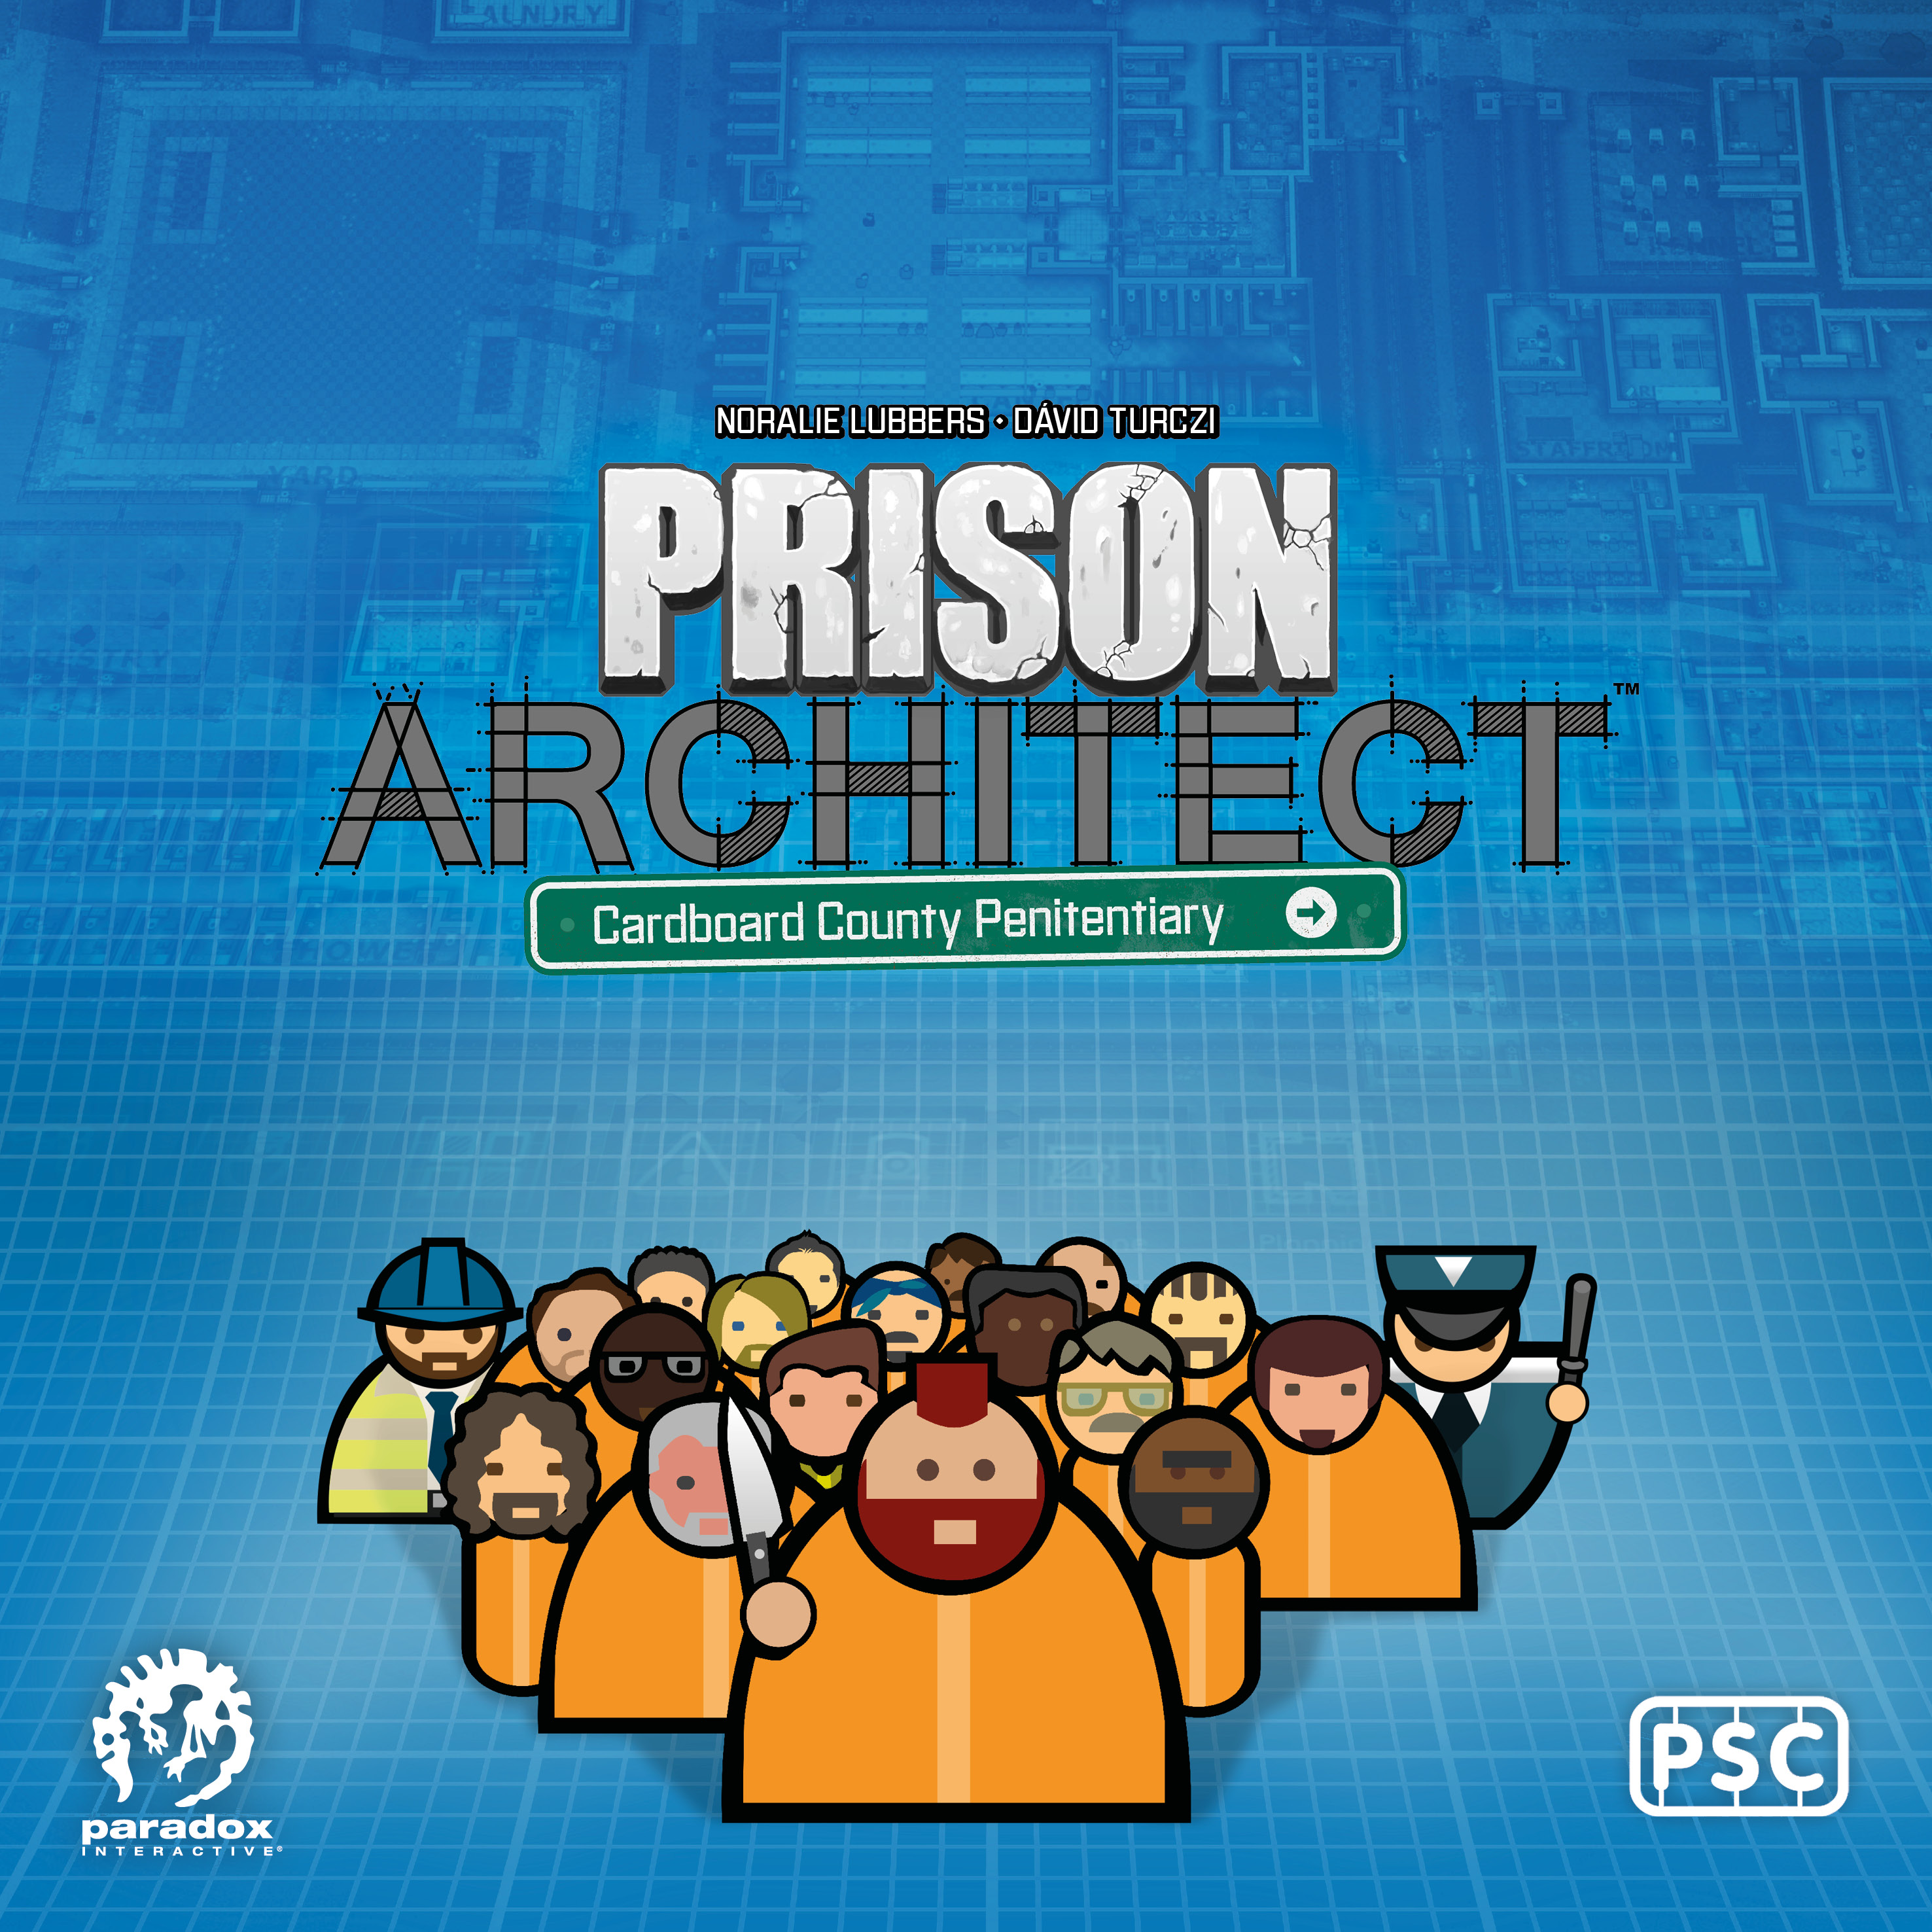 Prison Architect Cardboard County Penitentiary - PSC Games